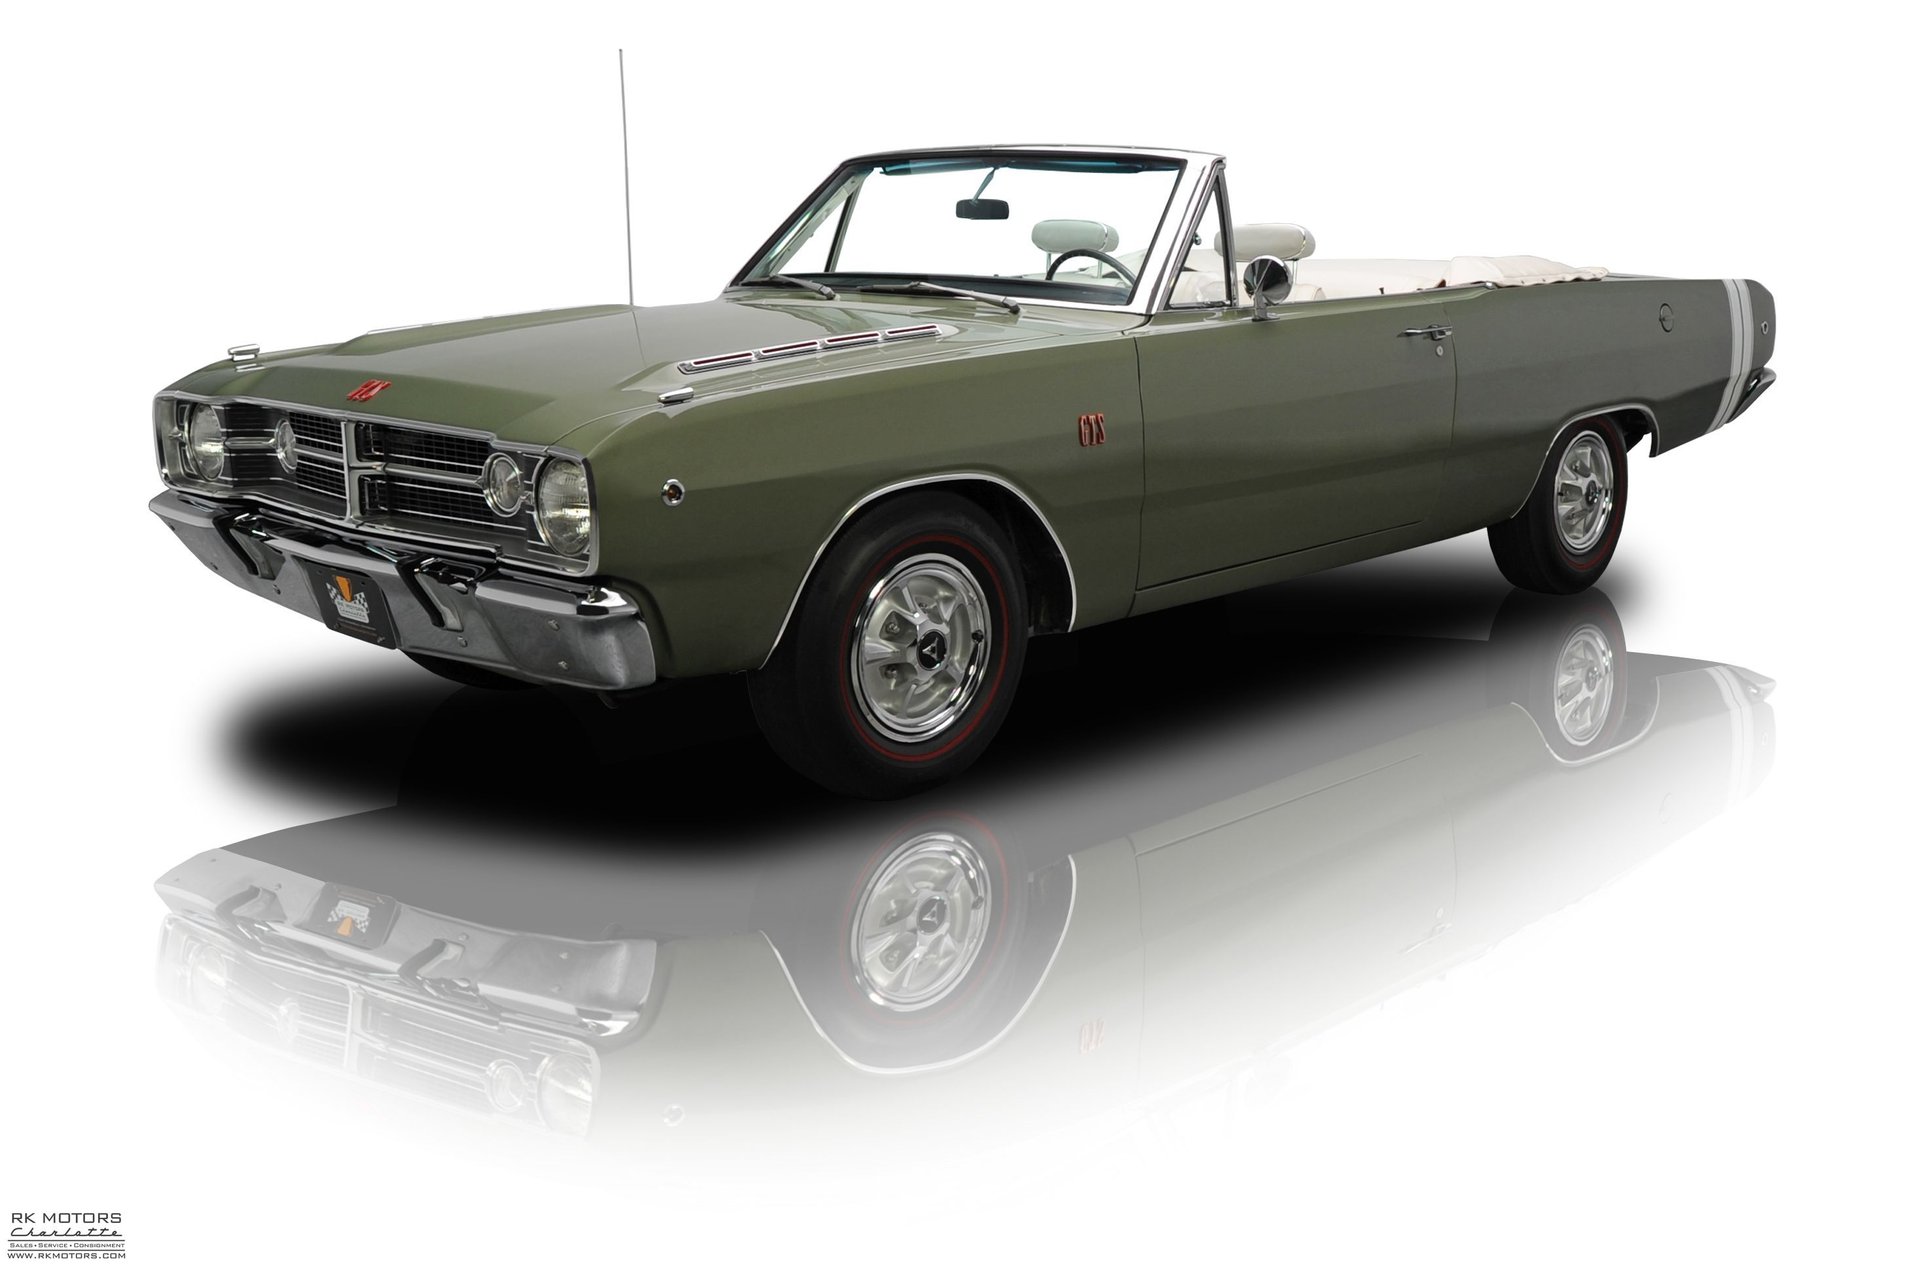 133234 1968 Dodge Dart RK Motors Classic Cars and Muscle Cars for Sale